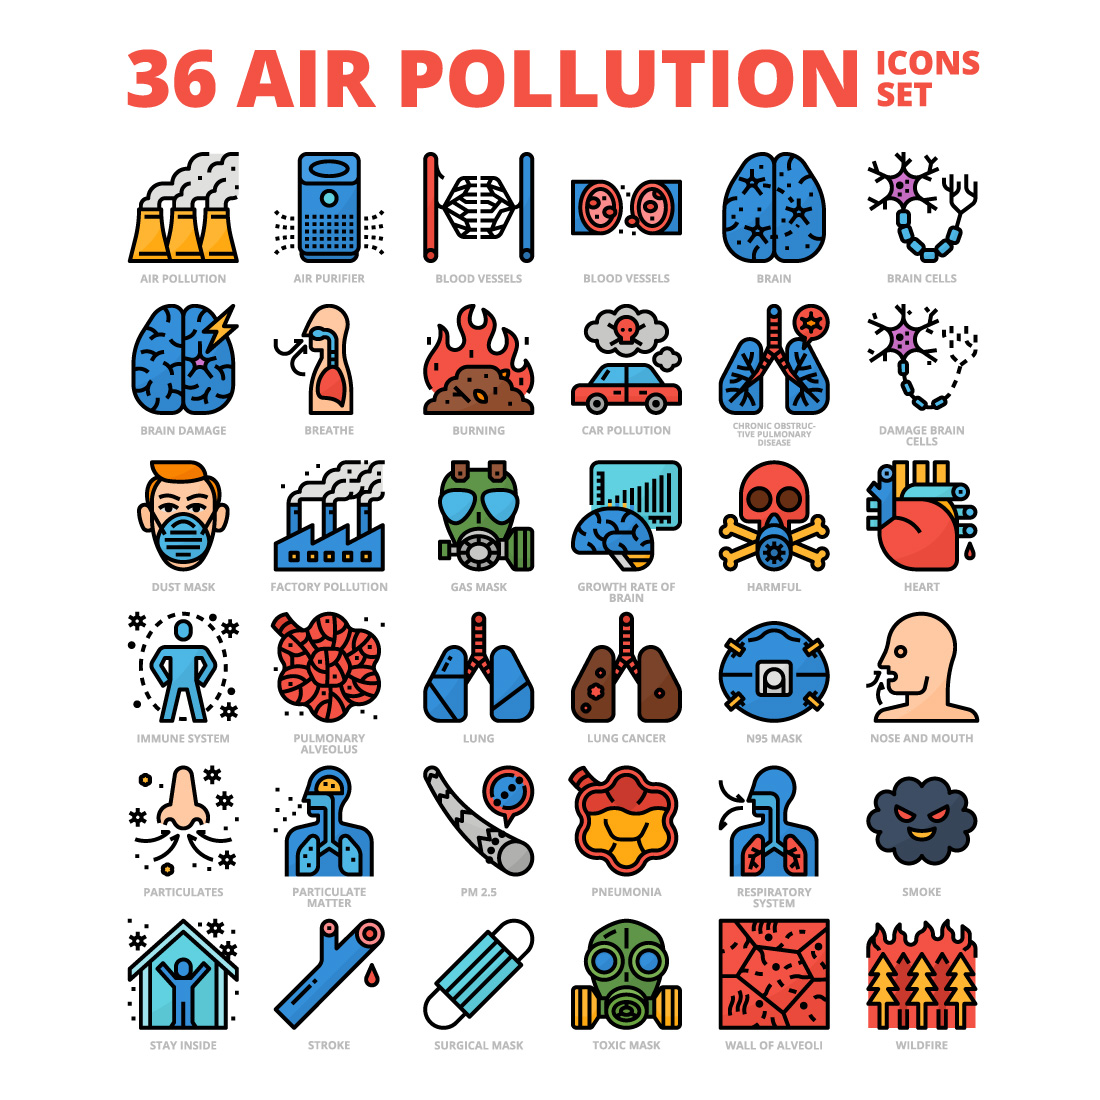 36 Air Pollution Icons Set x 4 Styles cover image.